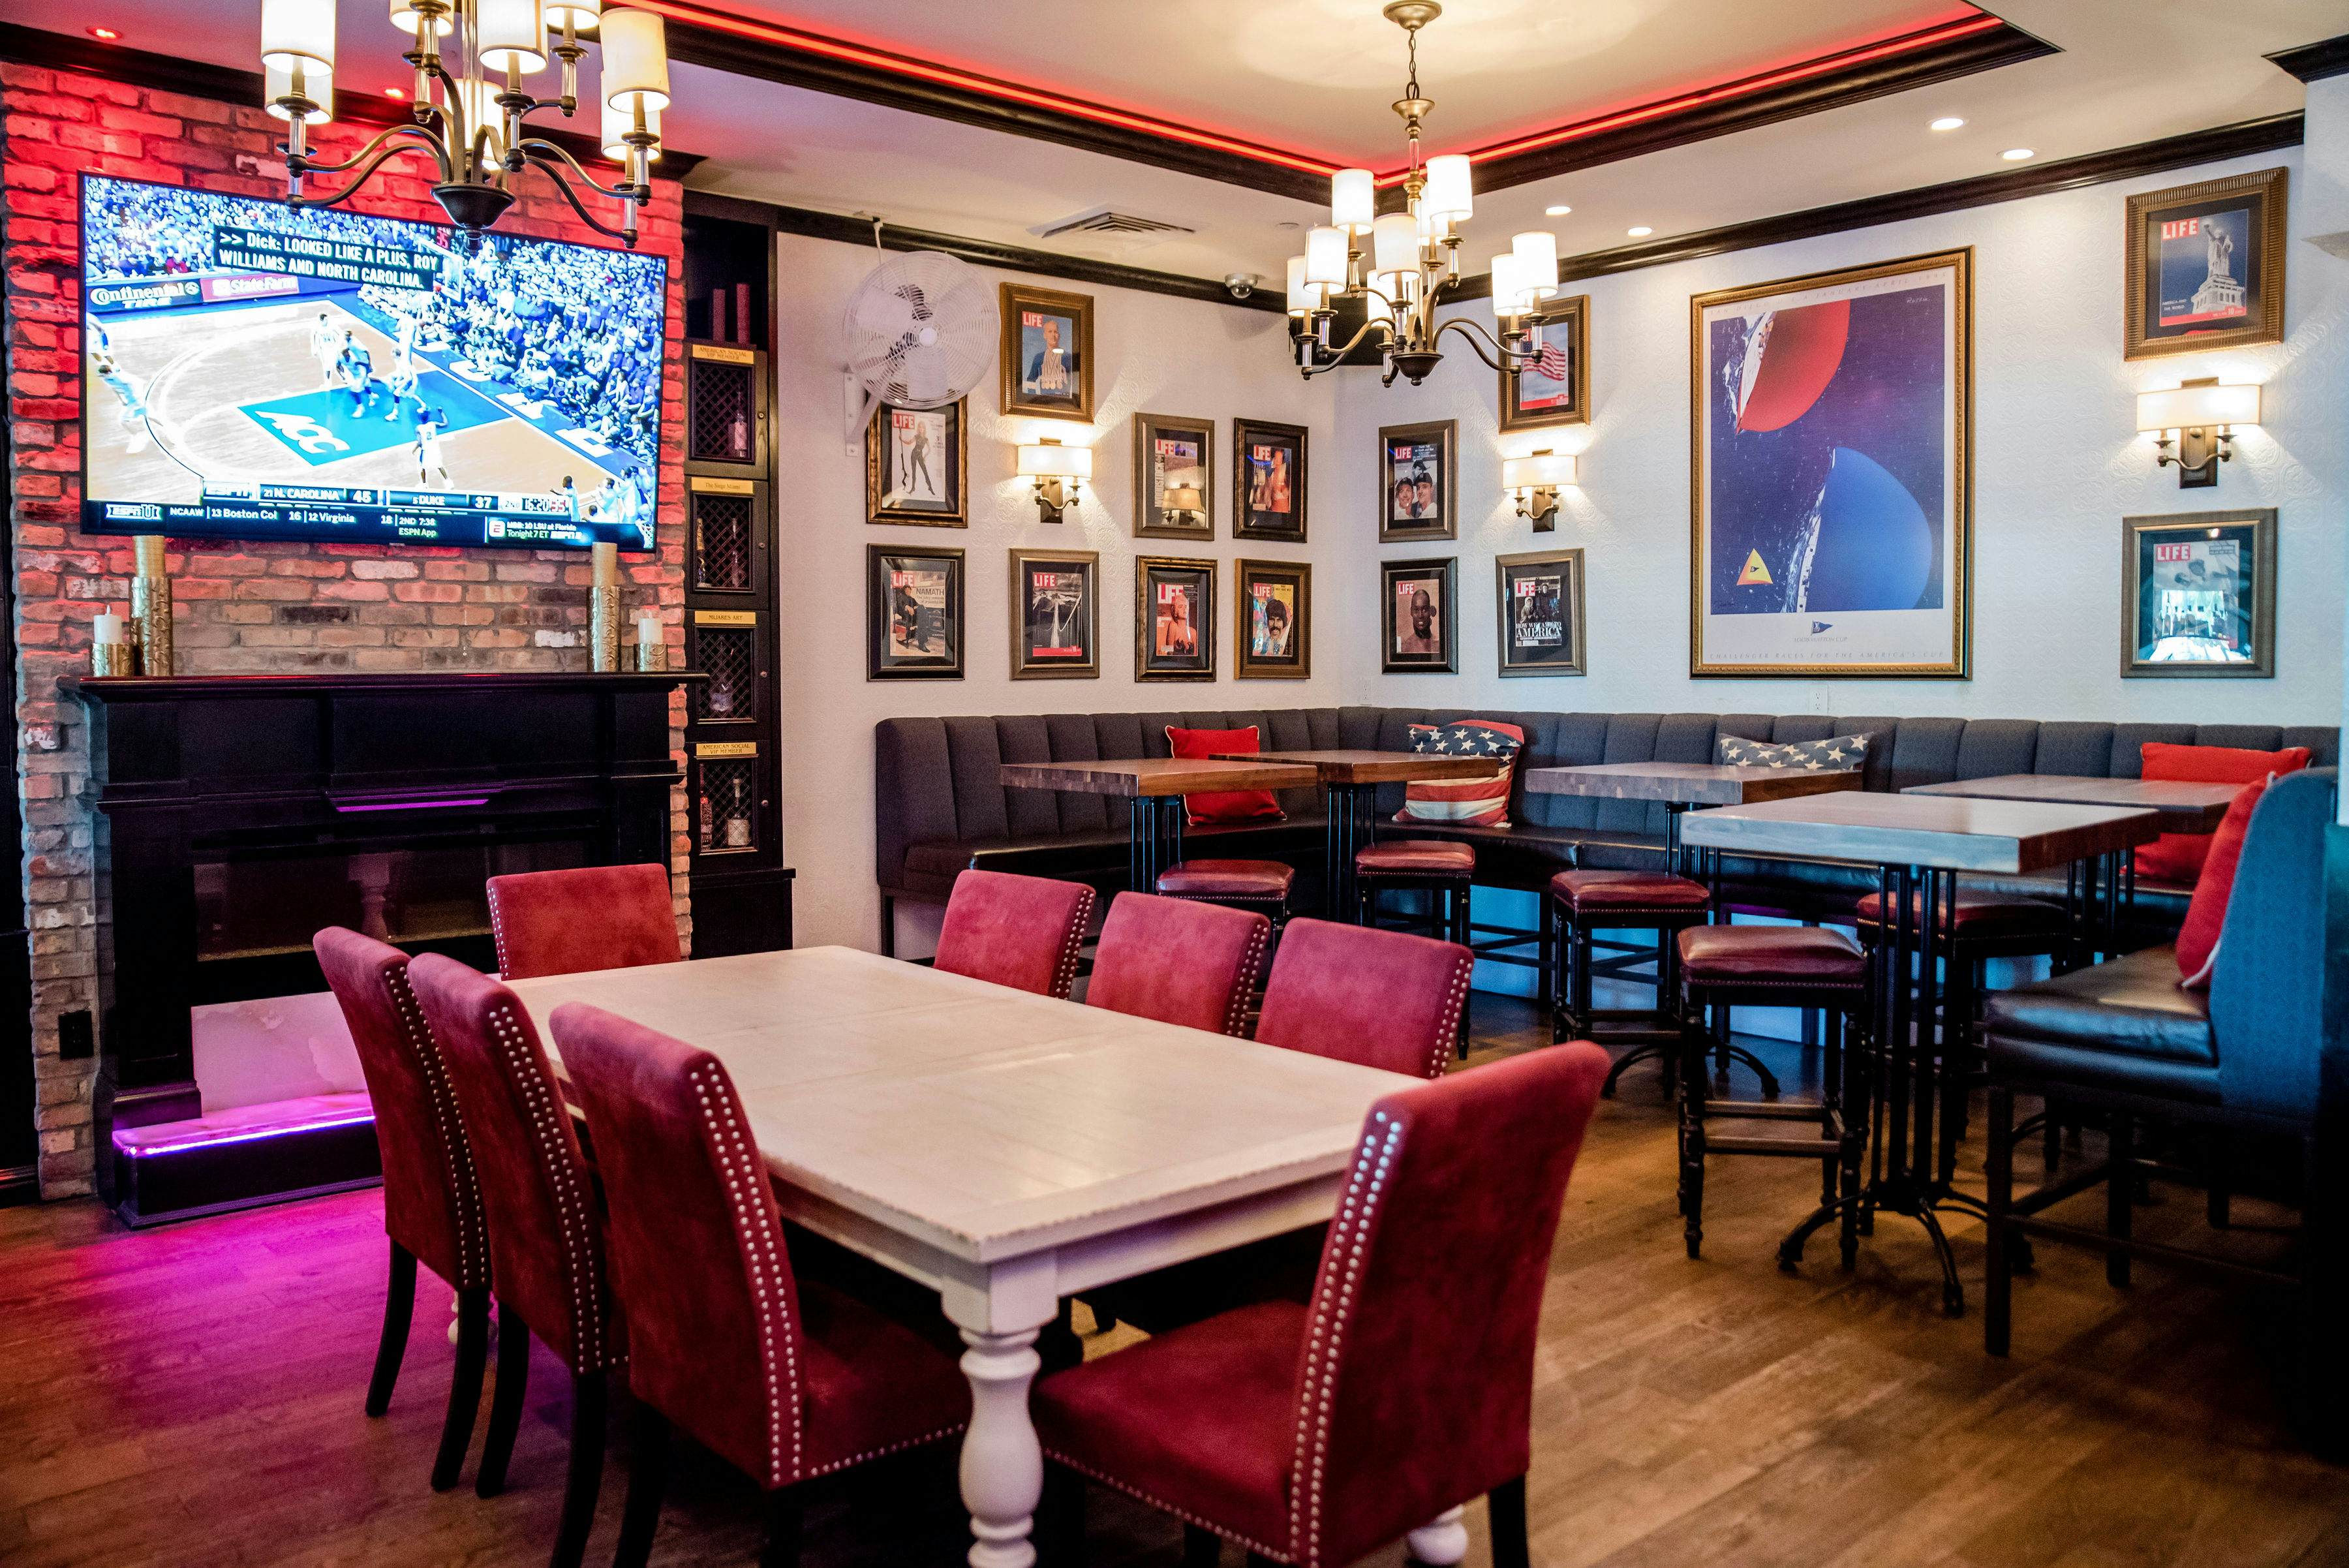 Best sports bars to watch the Super Bowl - Lonely Planet